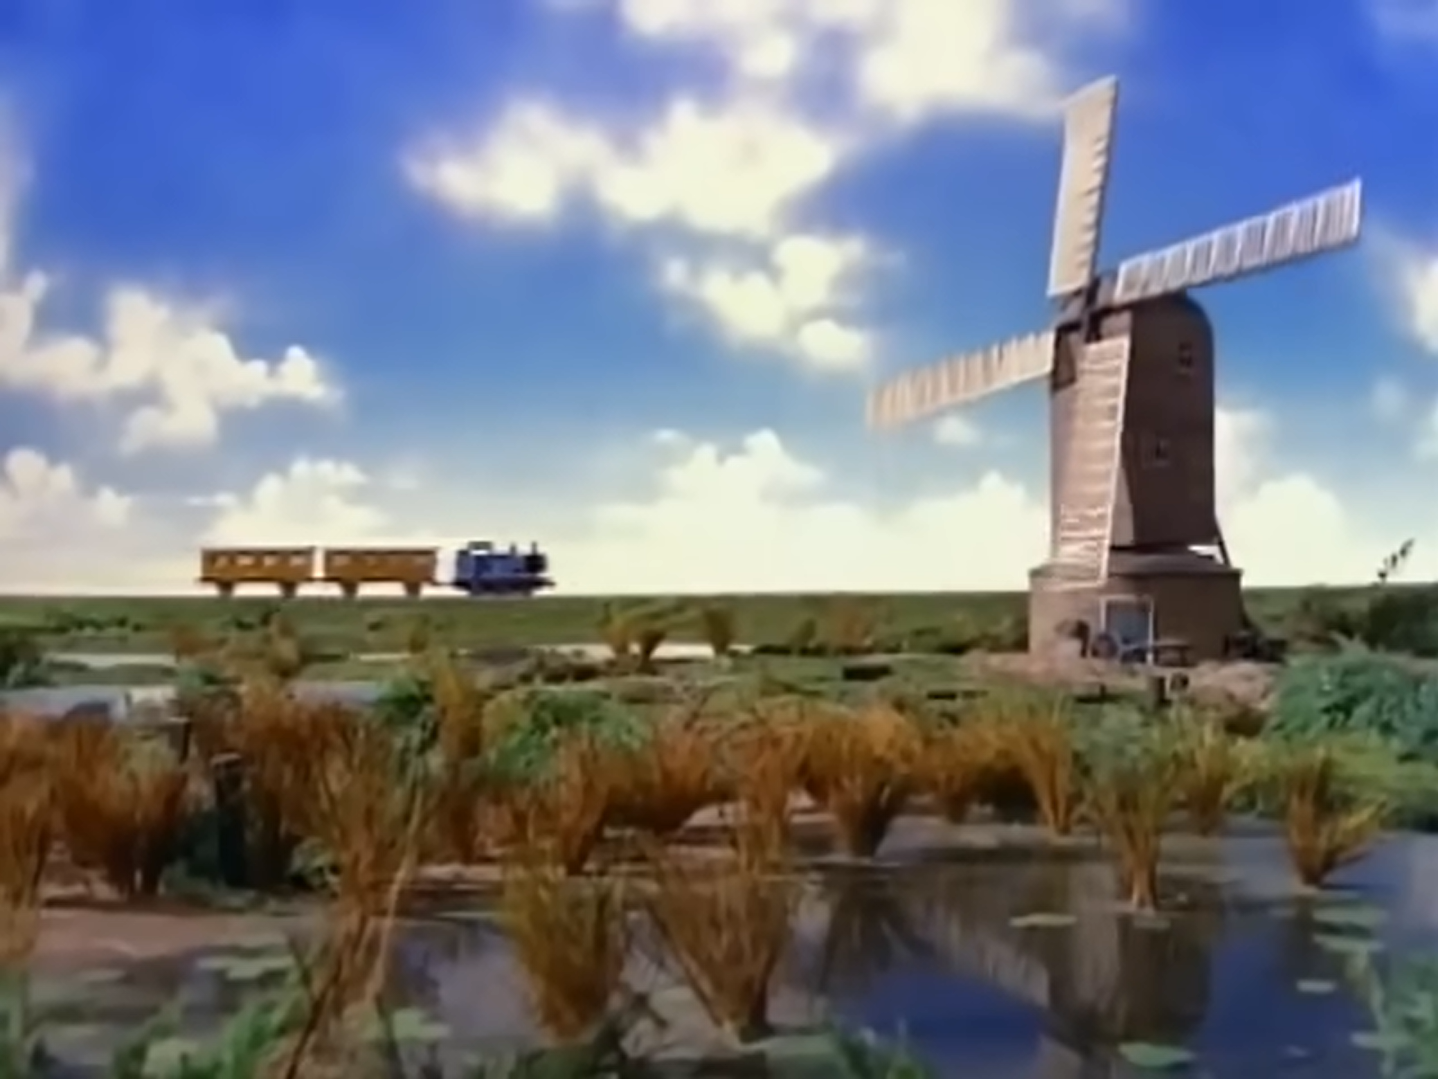 Thomas the tank engine is on a train track which is heading towards a windmill, with a blue sky